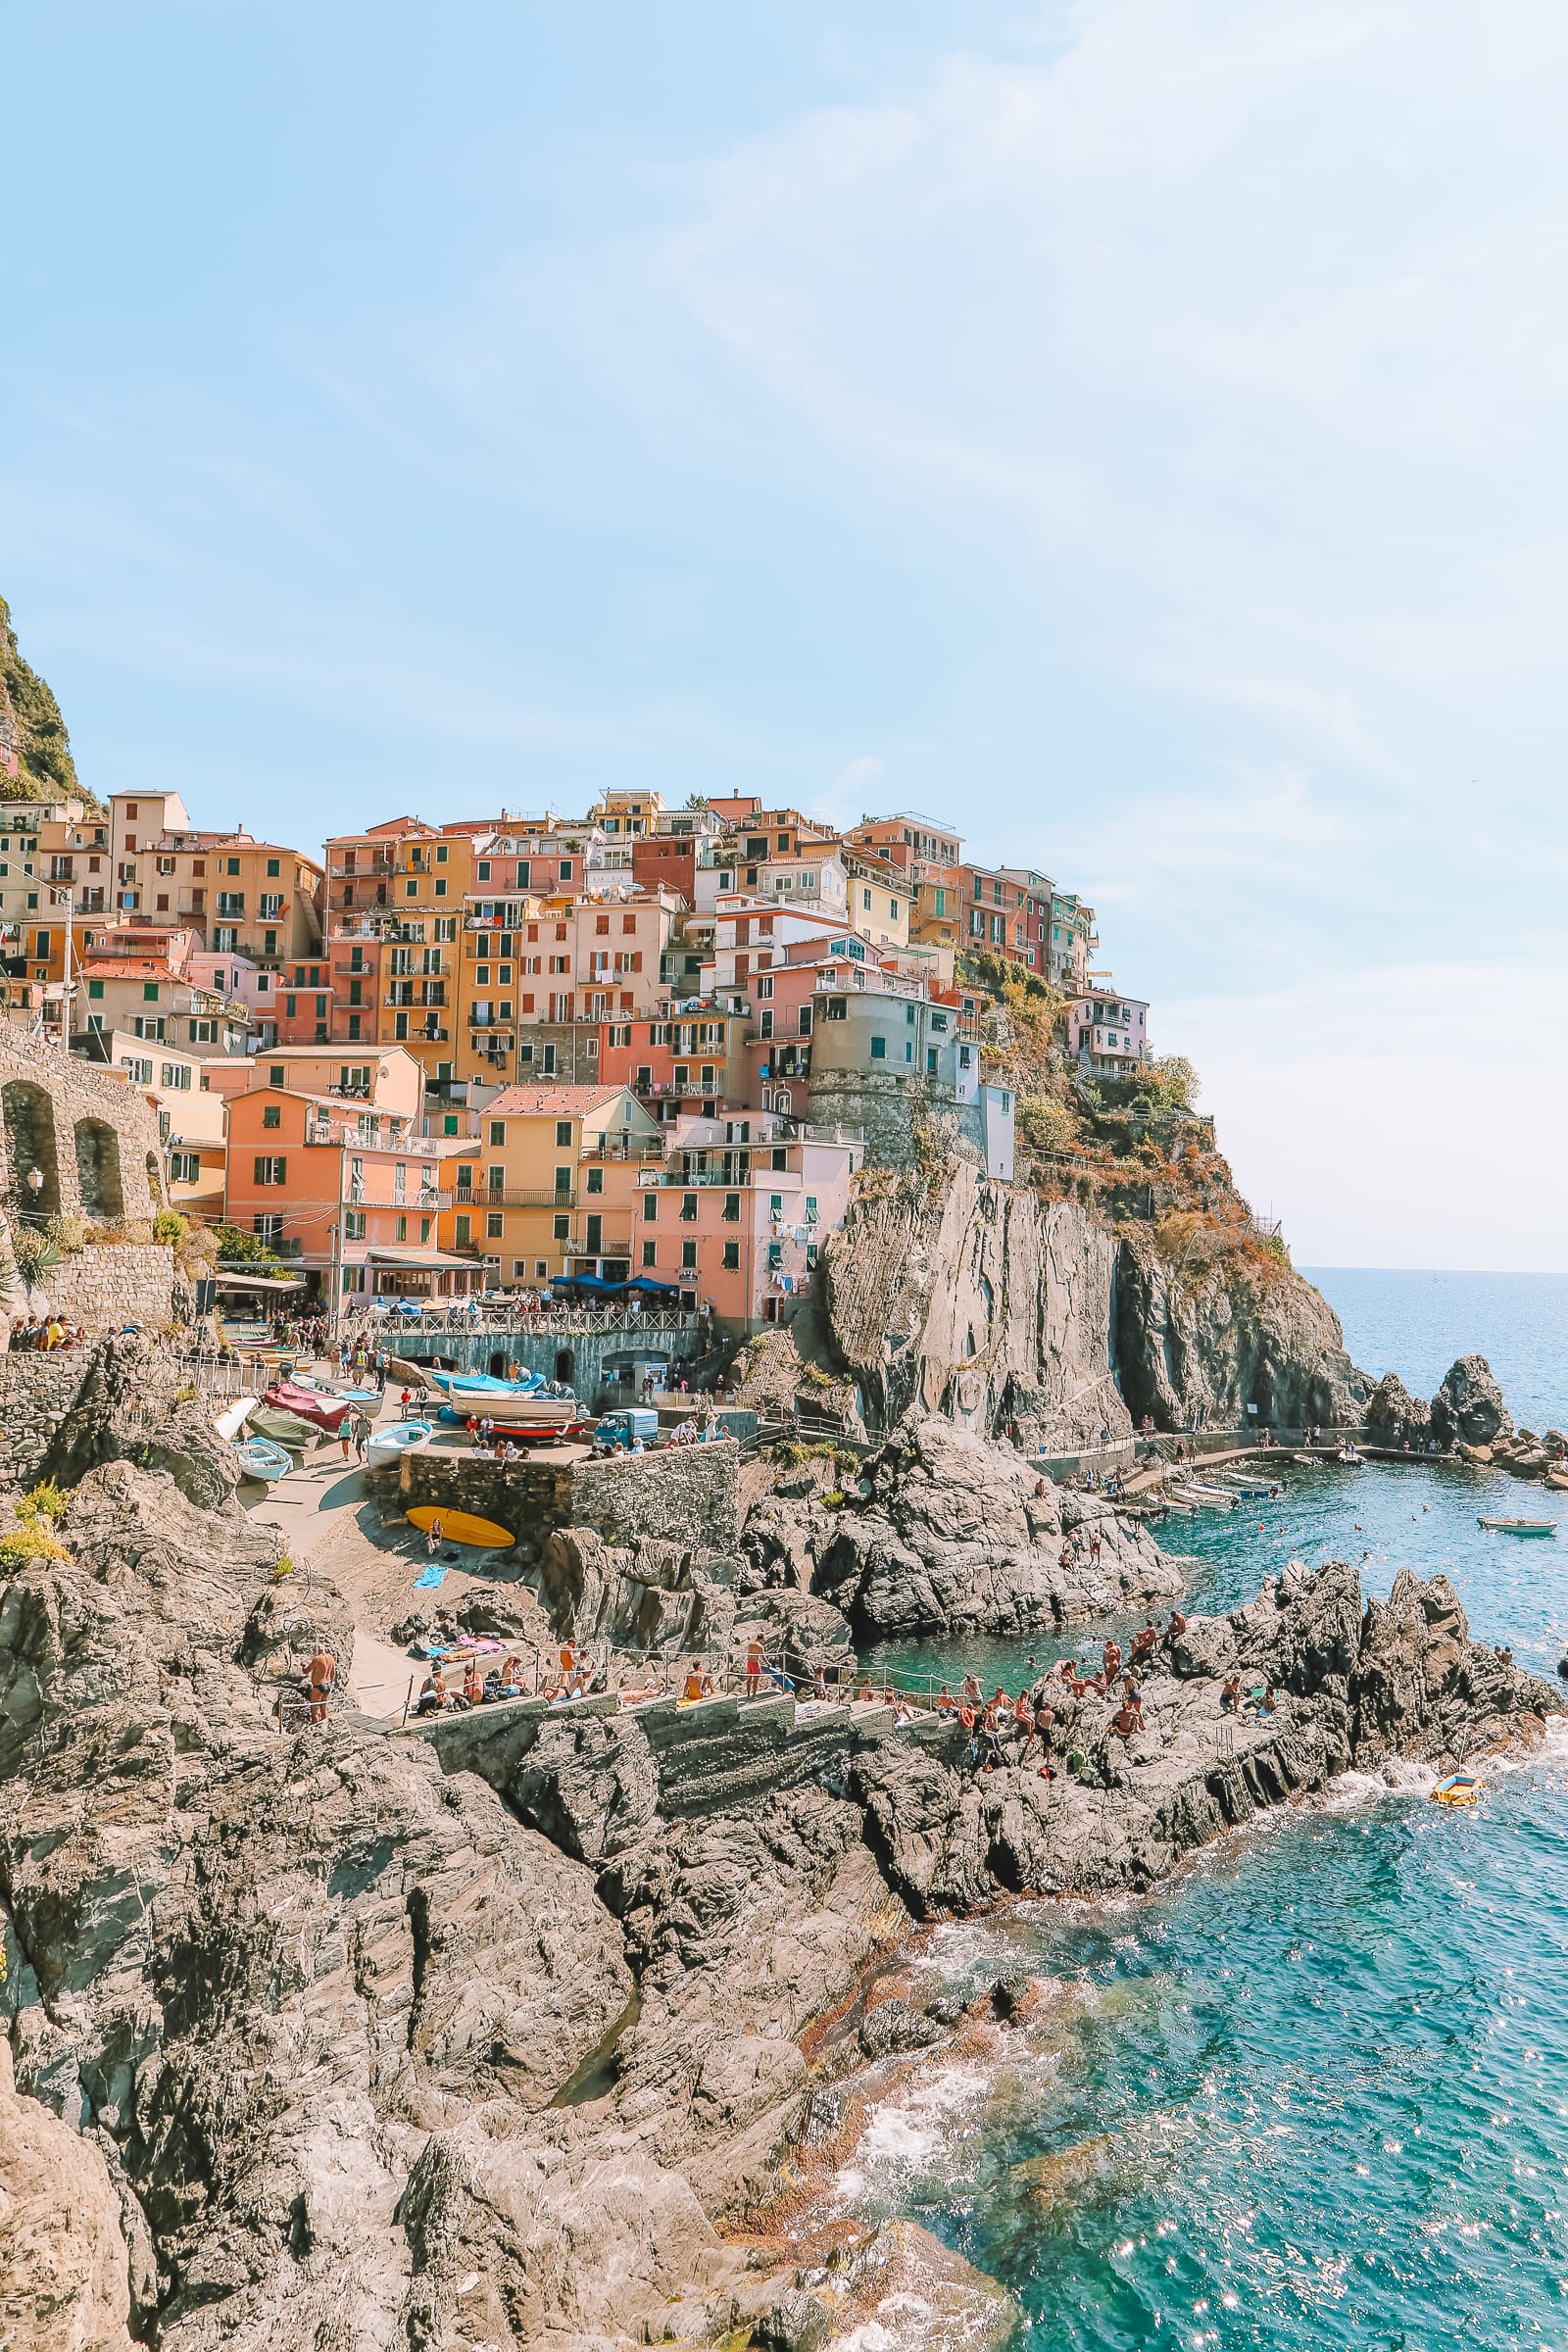 11 Stunning Things To Do In Cinque Terre, Italy (5)